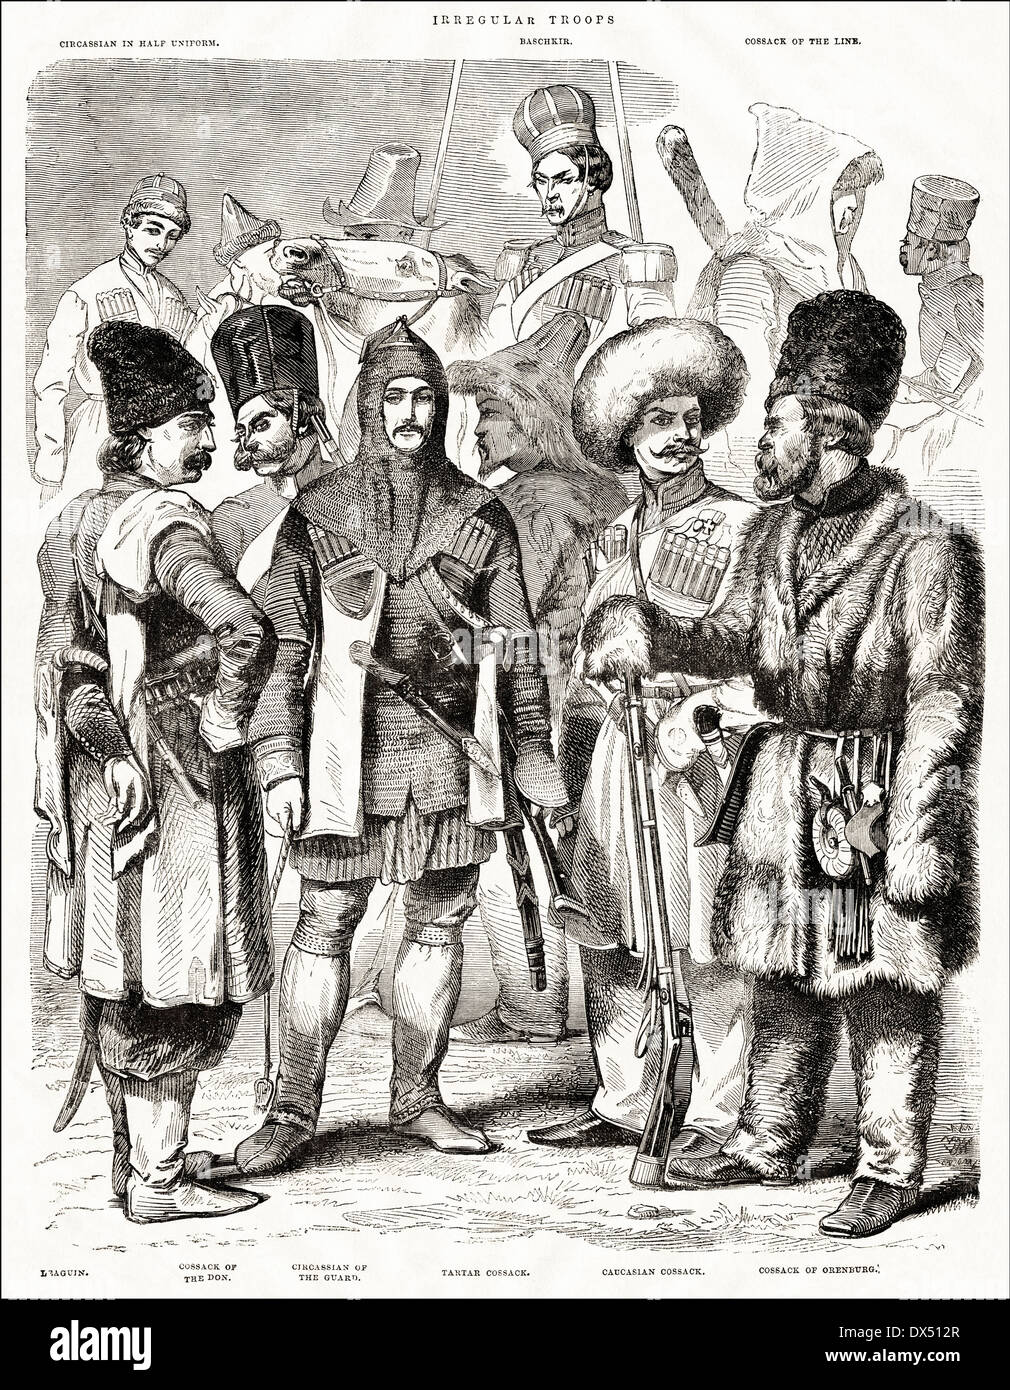 Russian irregular troops that fought during the Crimean War Oct 1853 - Feb 1856. Victorian engraving circa 1854. Stock Photo